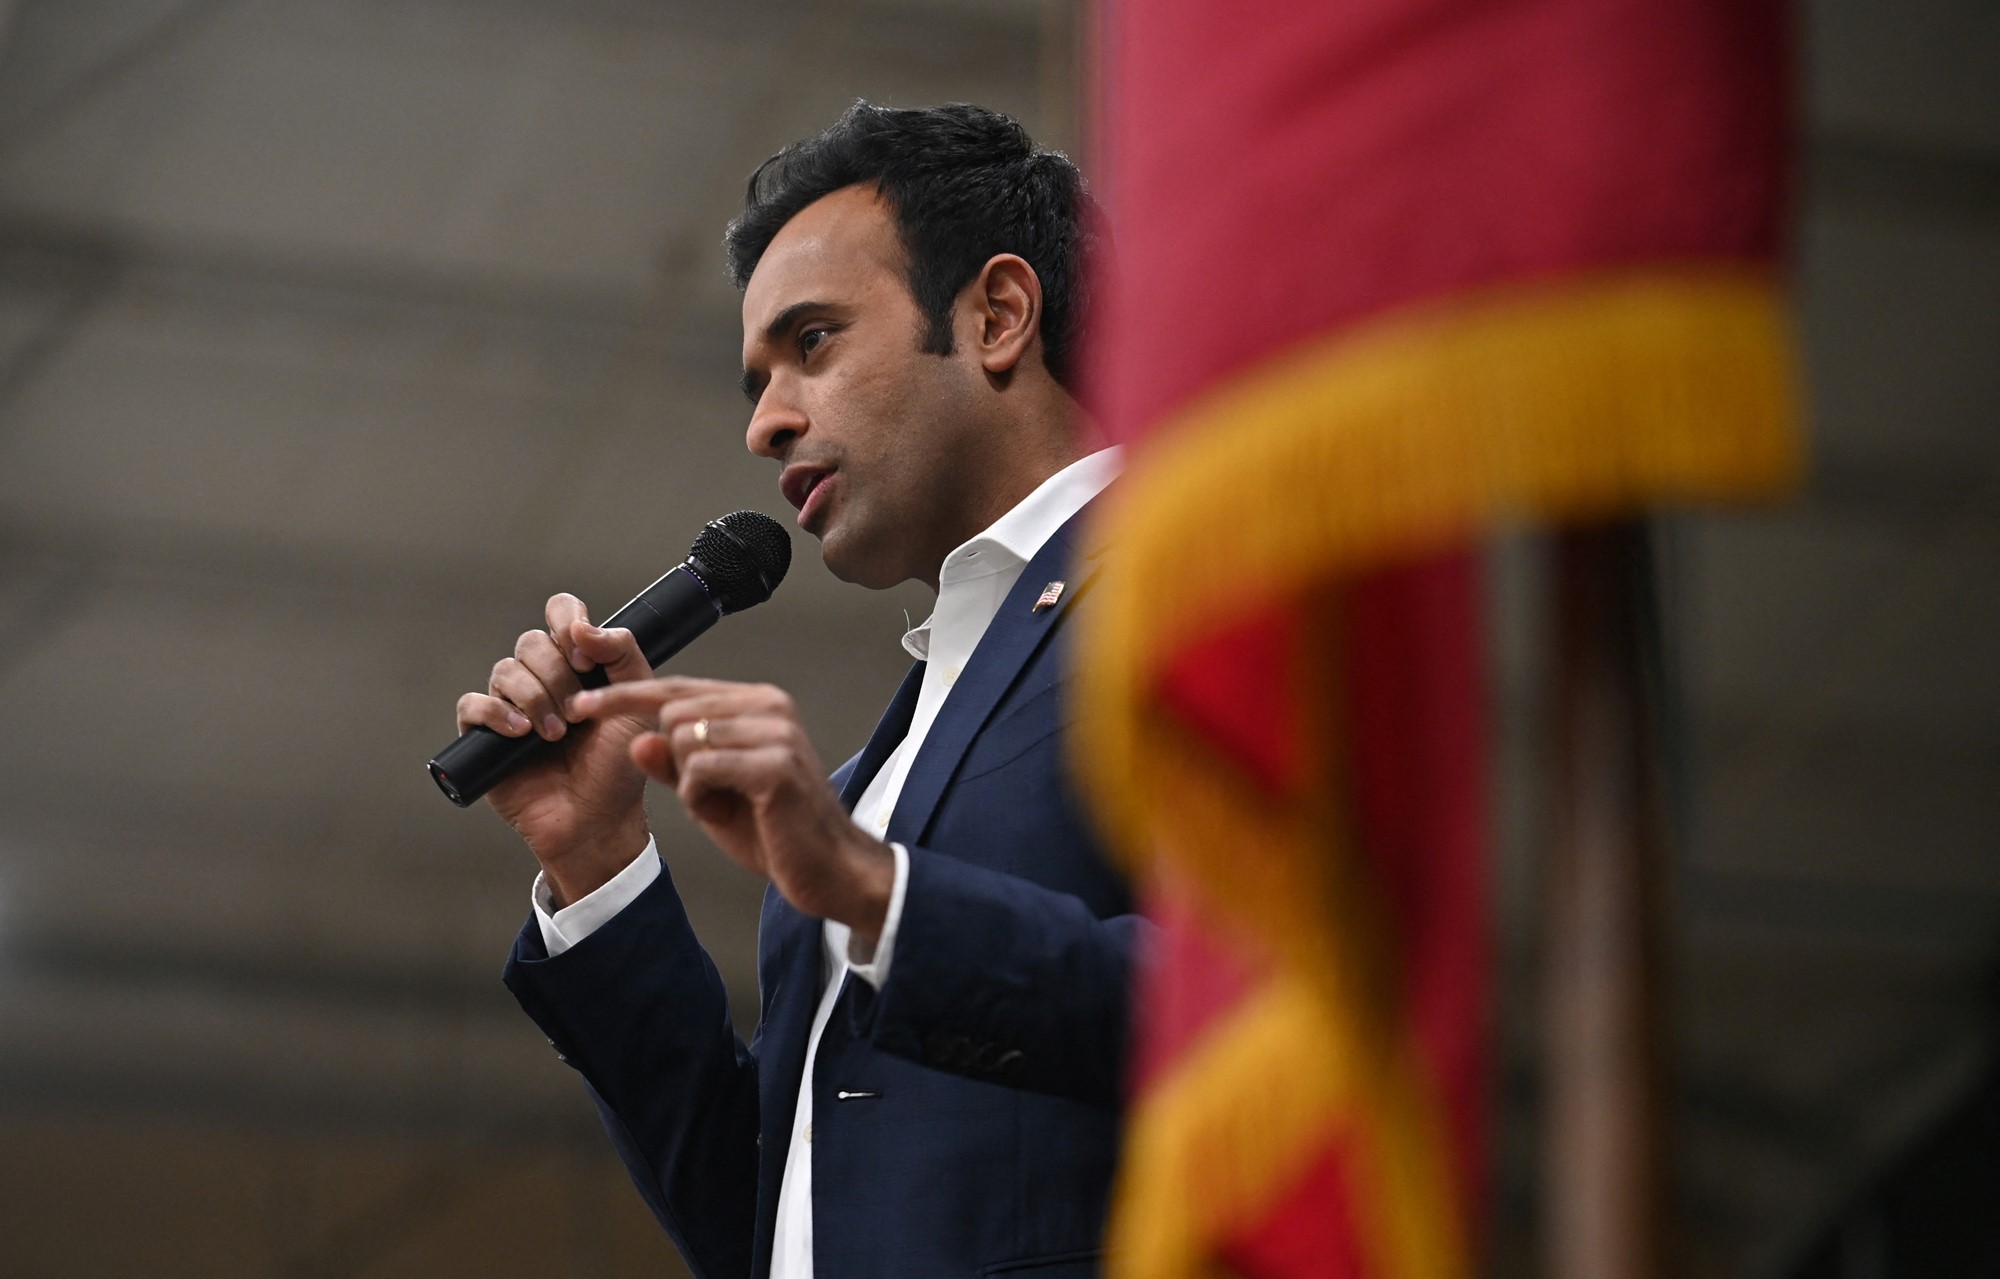 Vivek Ramaswamy speaks into a microphone, from behind a flag pole